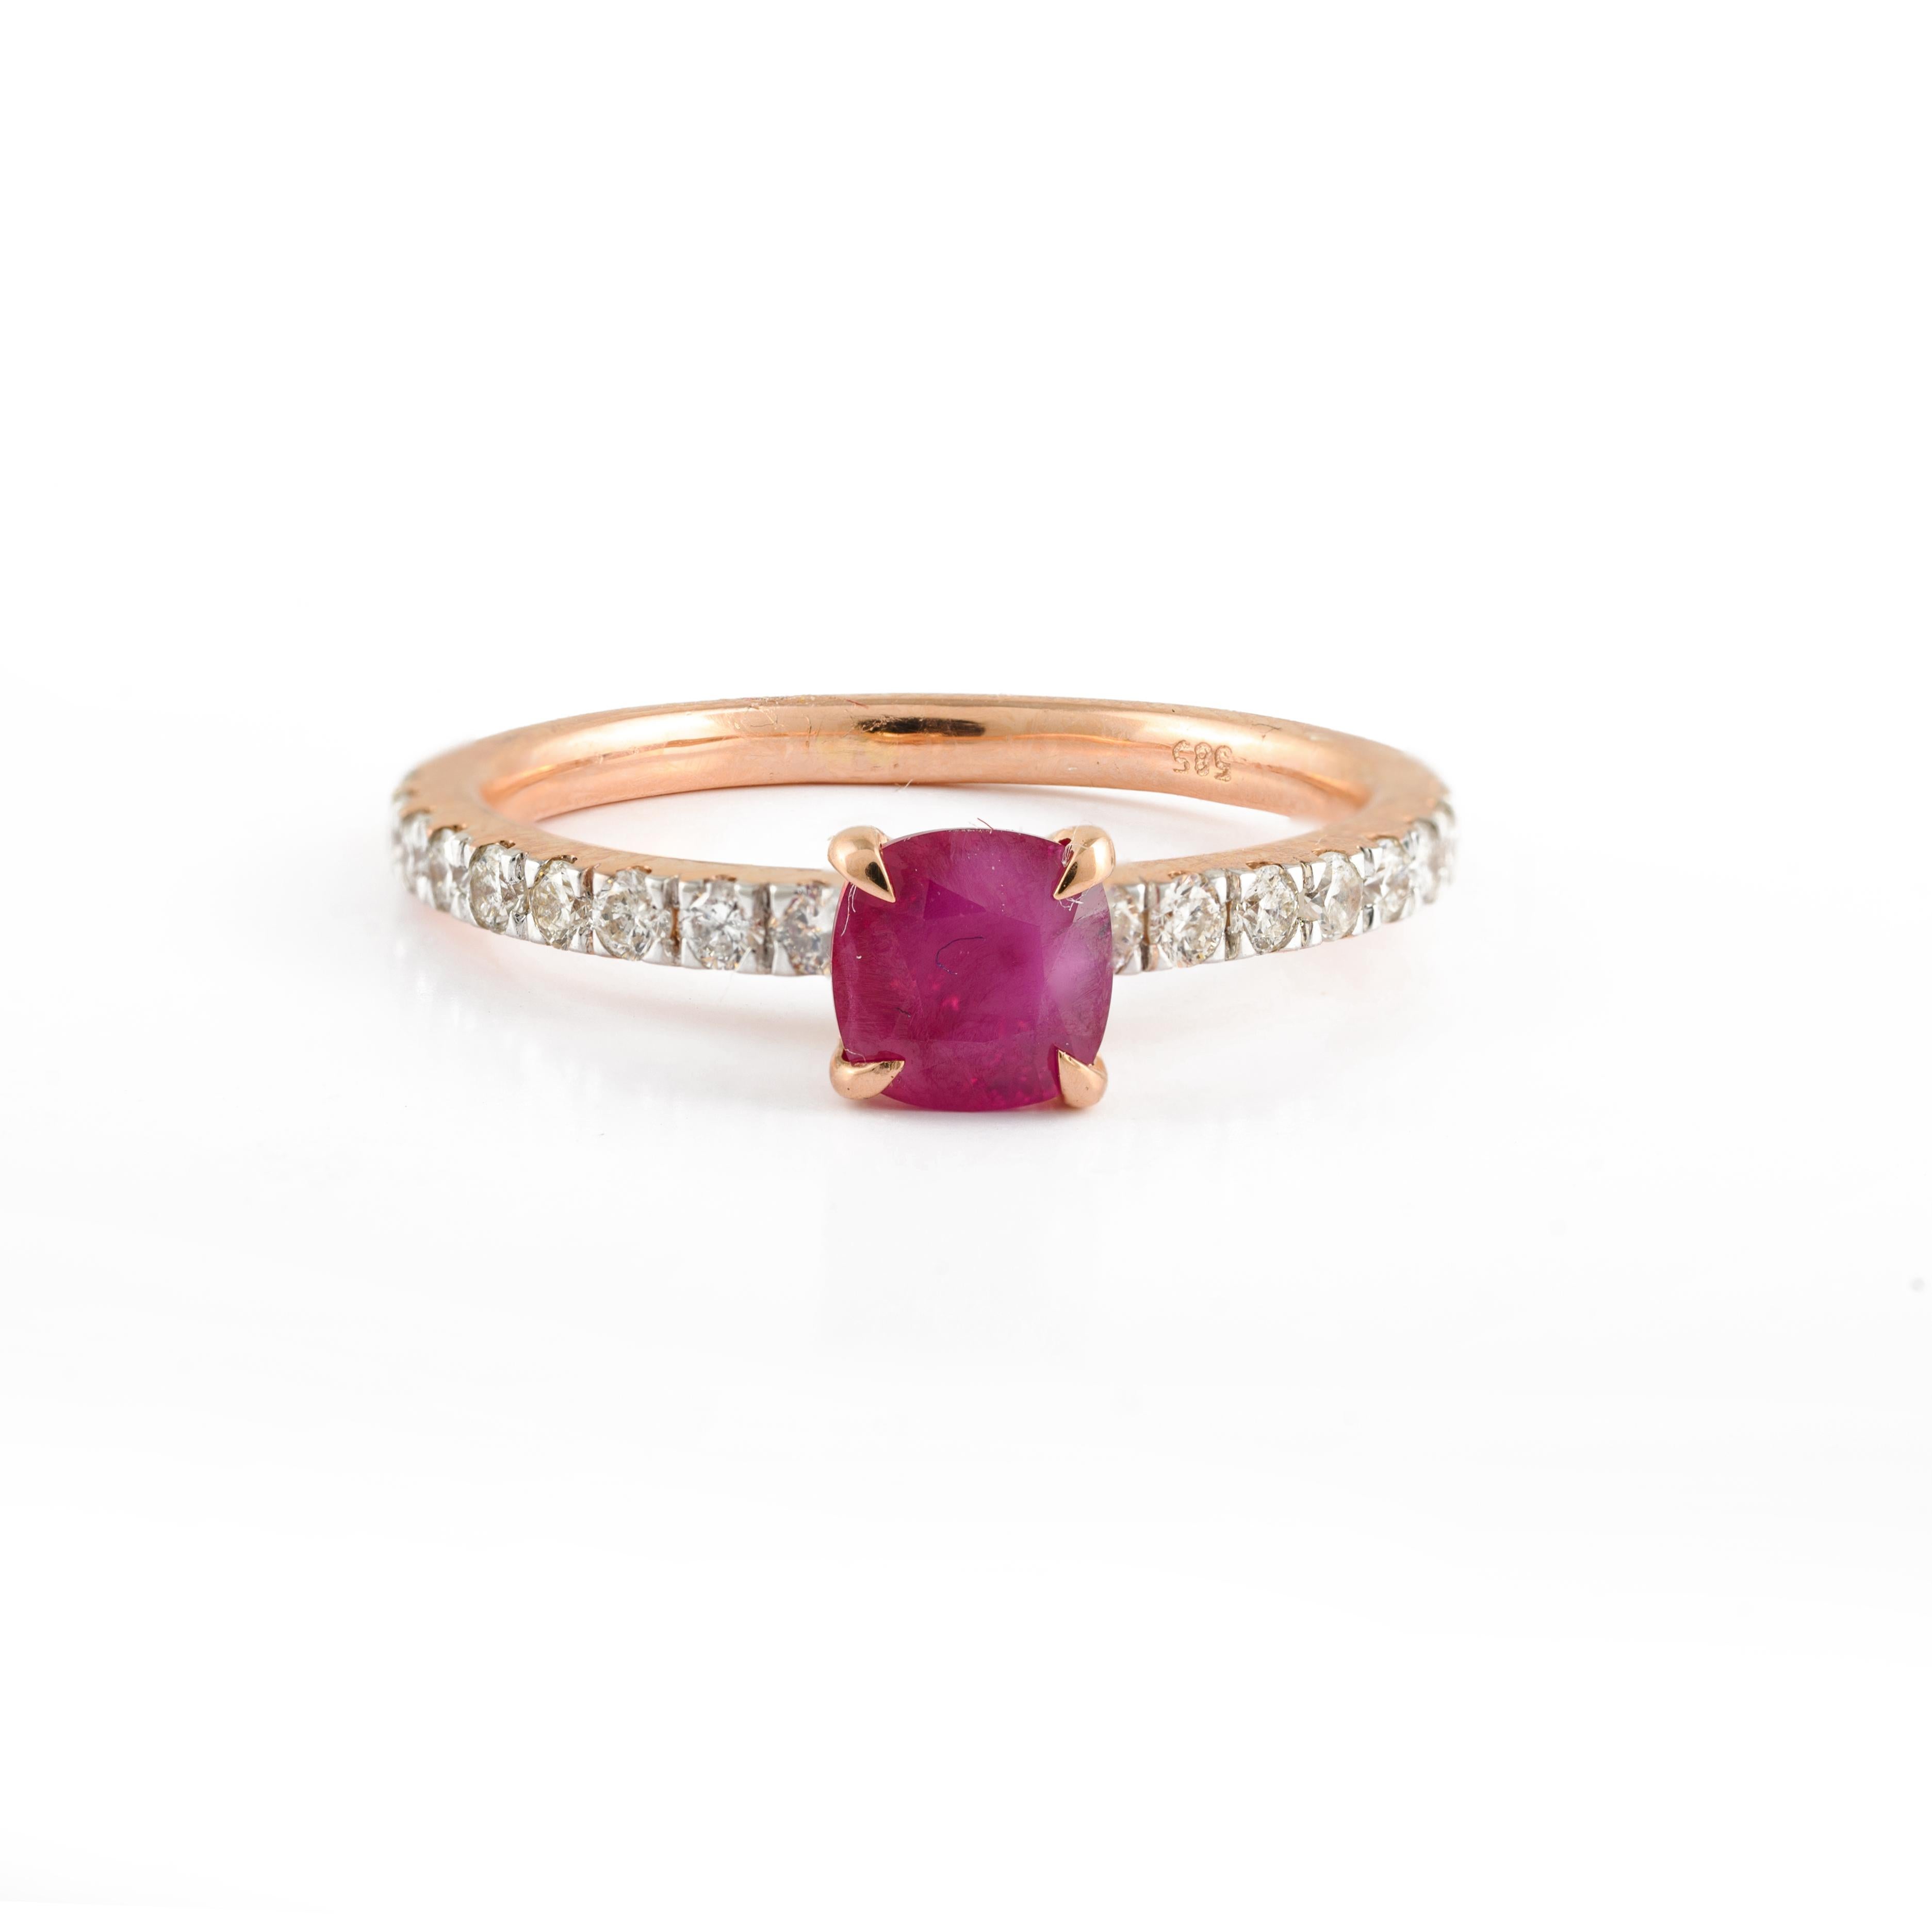 For Sale:  14kt Solid Rose Gold Ruby and Diamond Ring  2